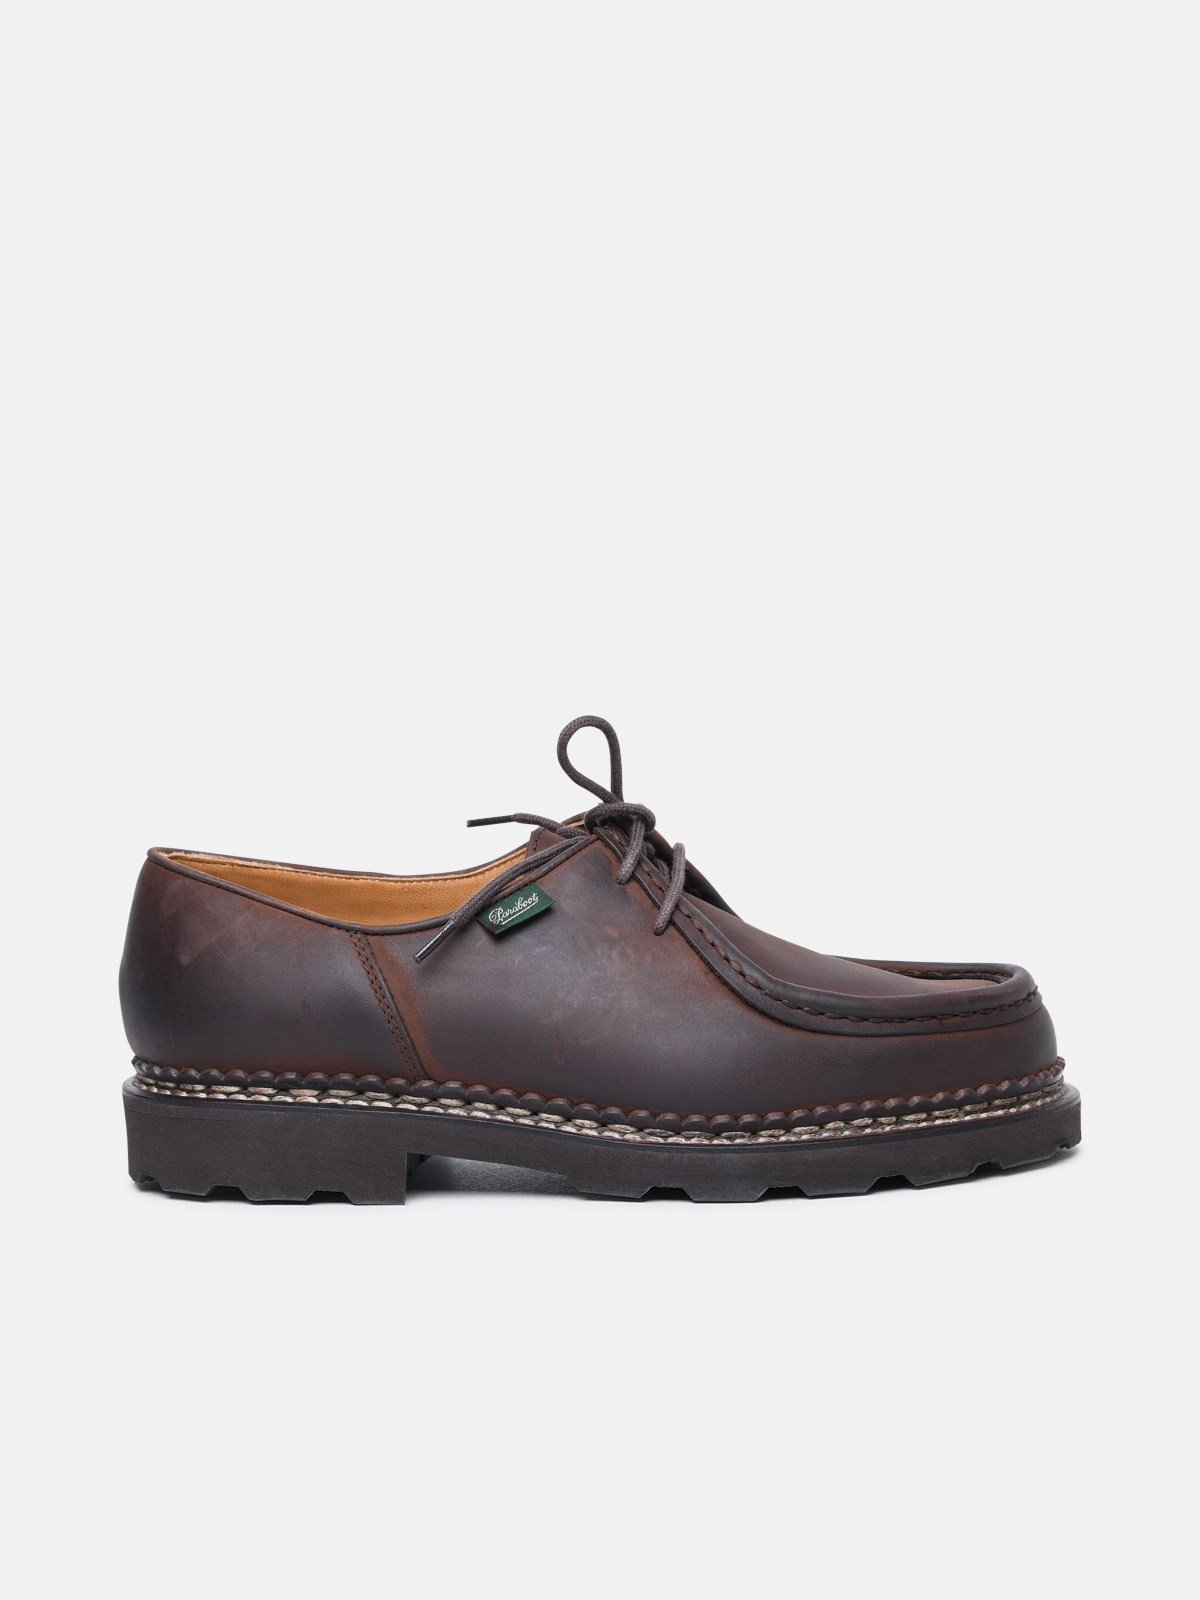 Paraboot 'michael' Brown Leather Derby Shoes